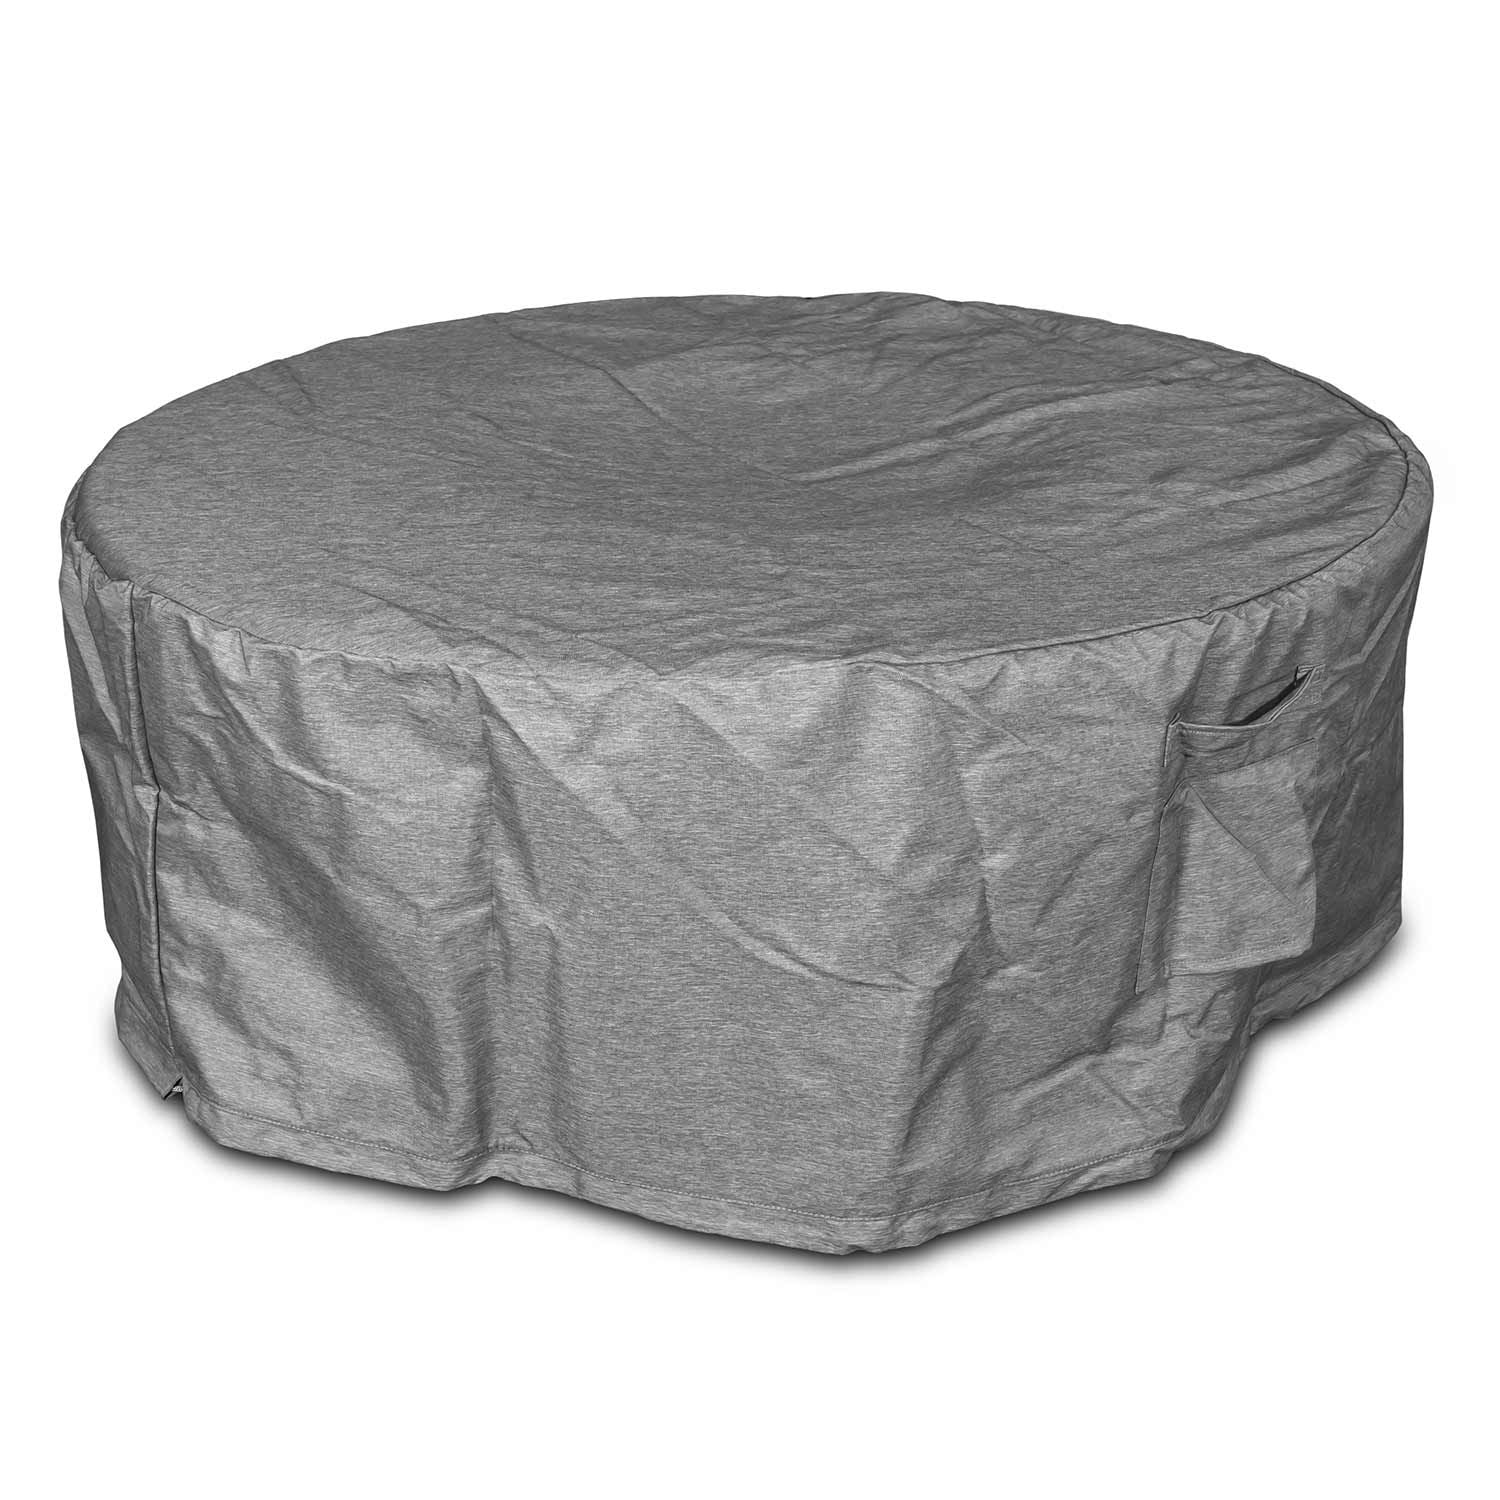 Grand Canyon COVER-FB-3913 Round Cover for 39-Inch Fire Bowl